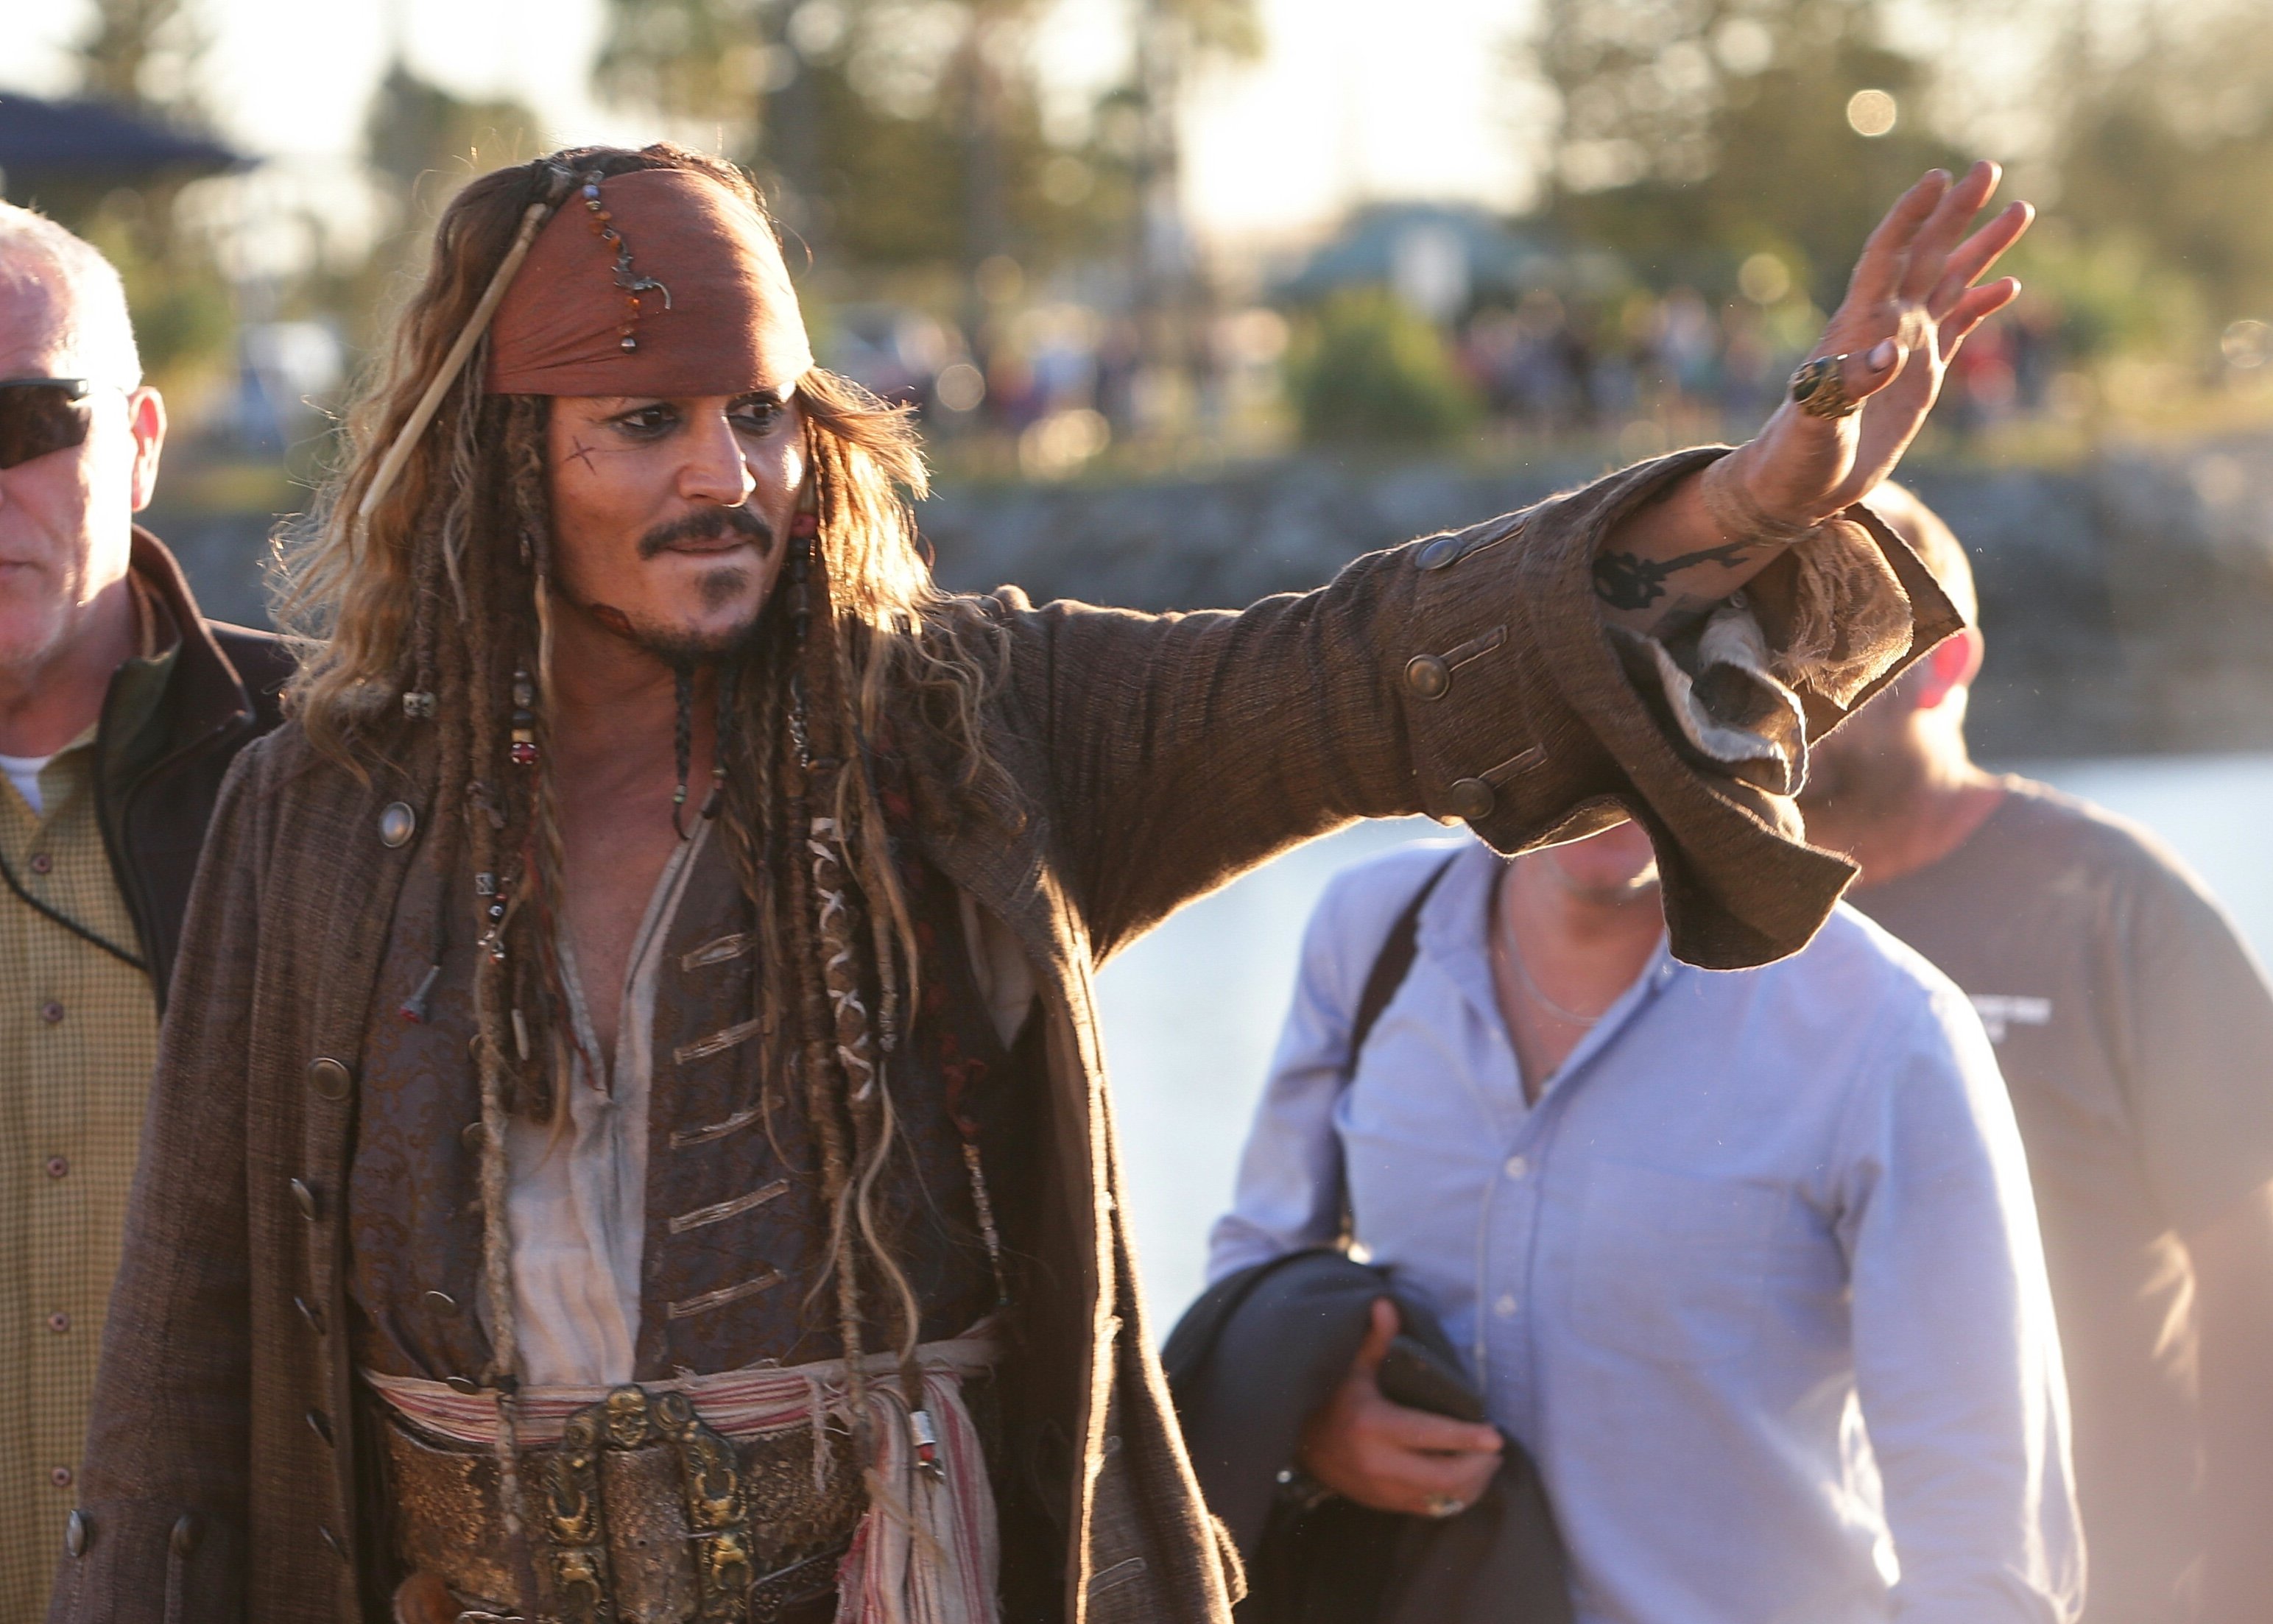 Johnny Depp greets fans in costume as Jack Sparrow